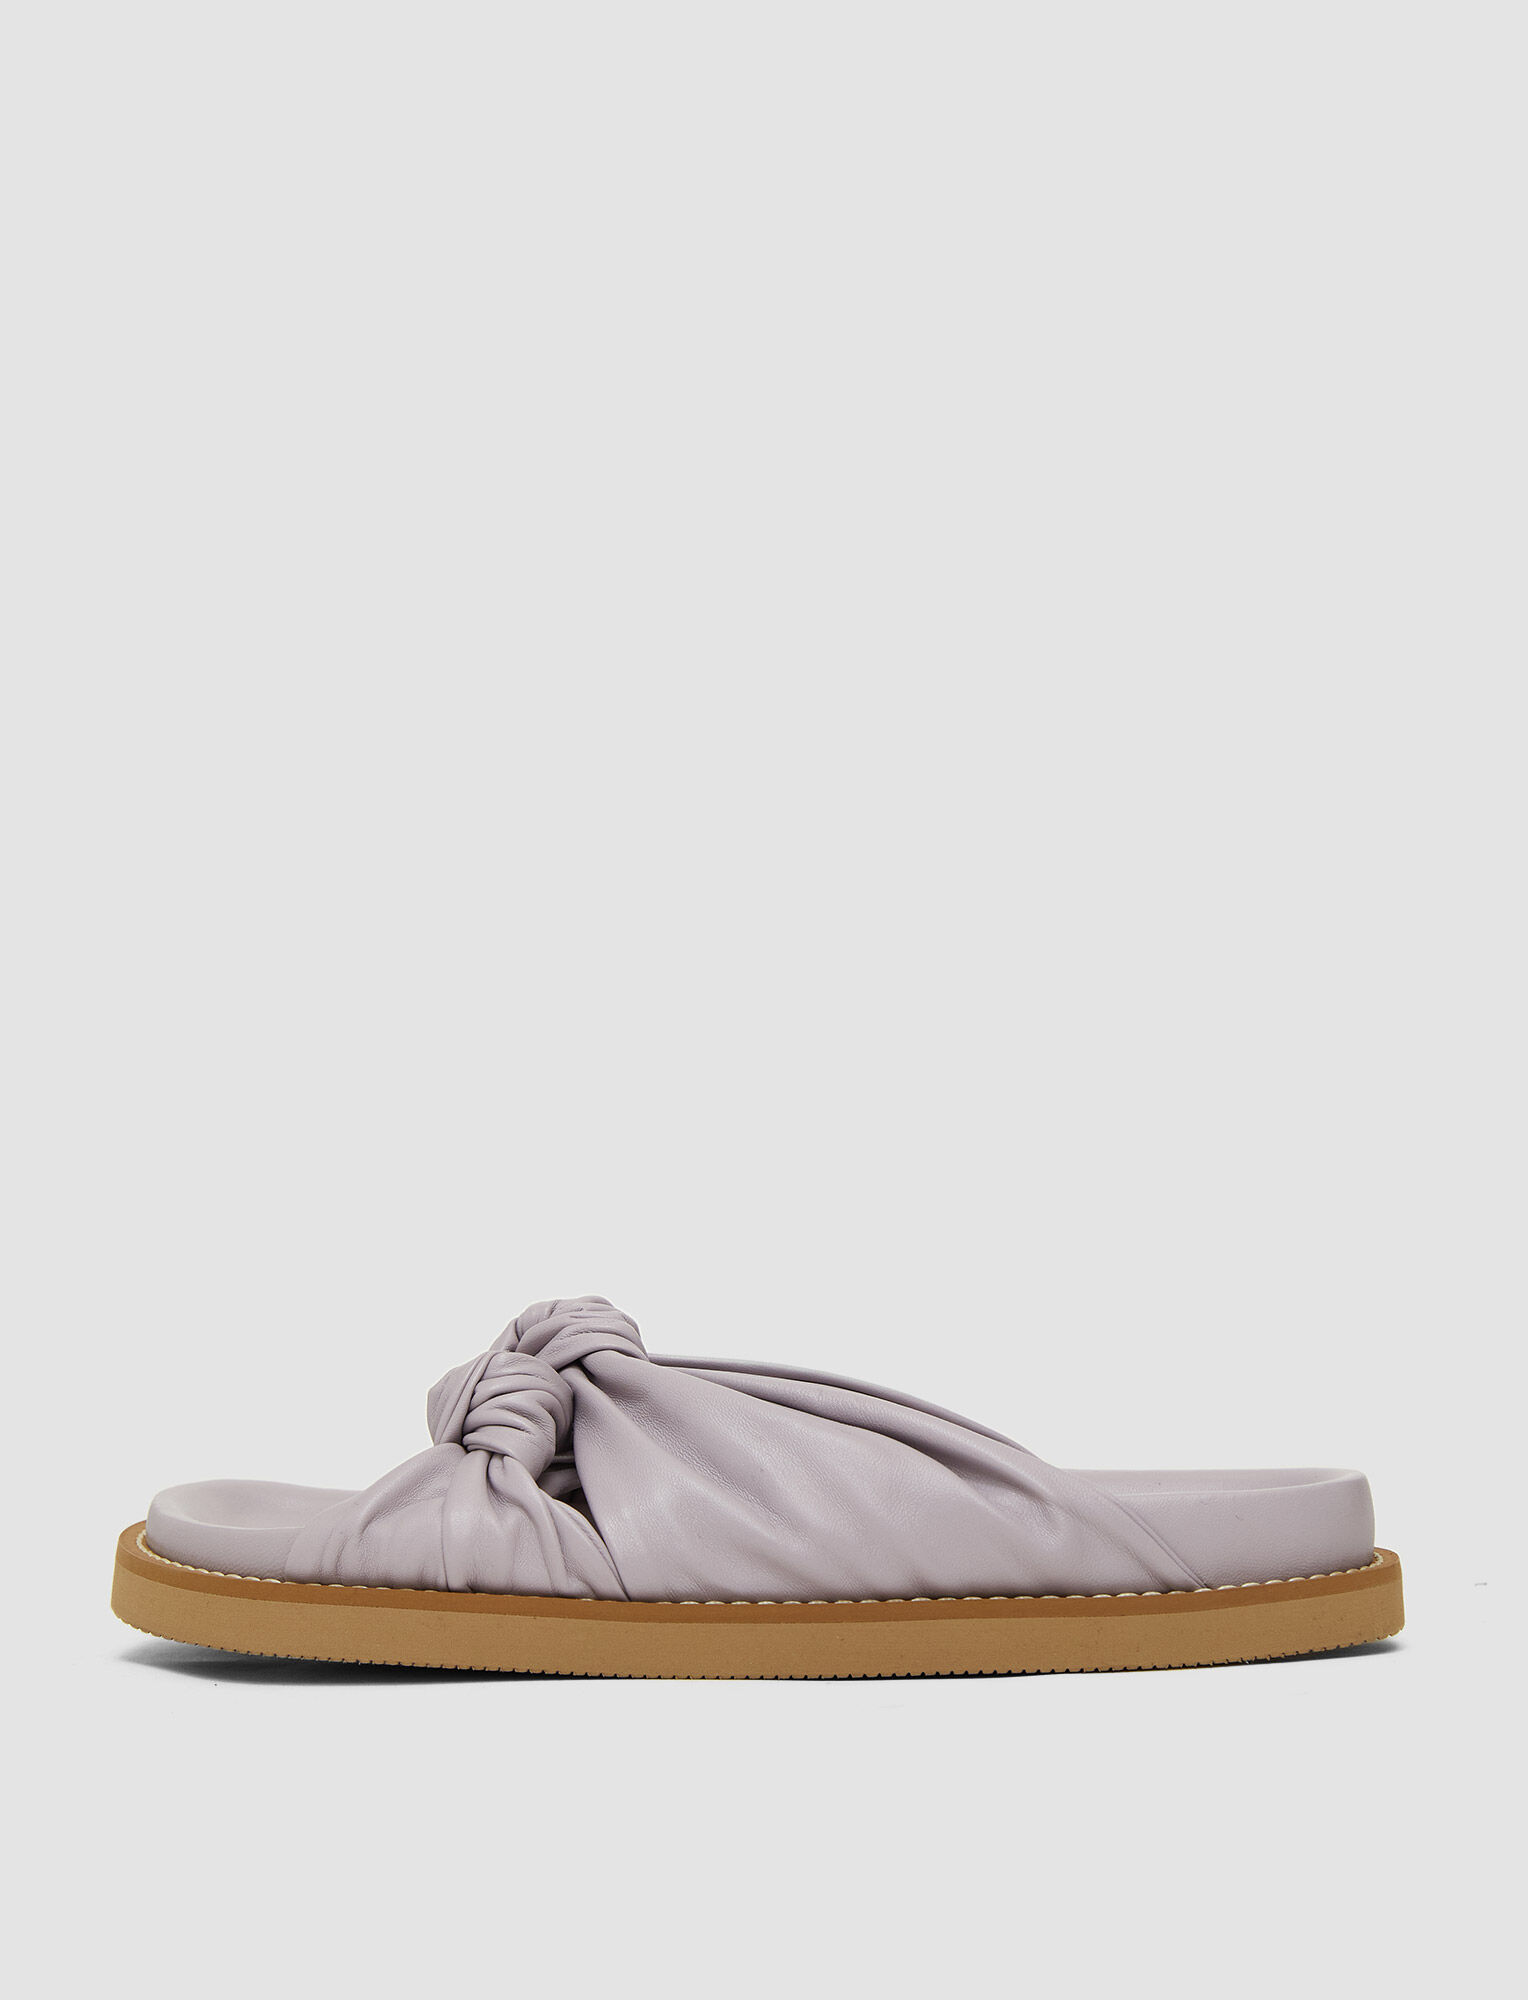 Joseph, Leather Big Knot Sandals, in Sweet Pea